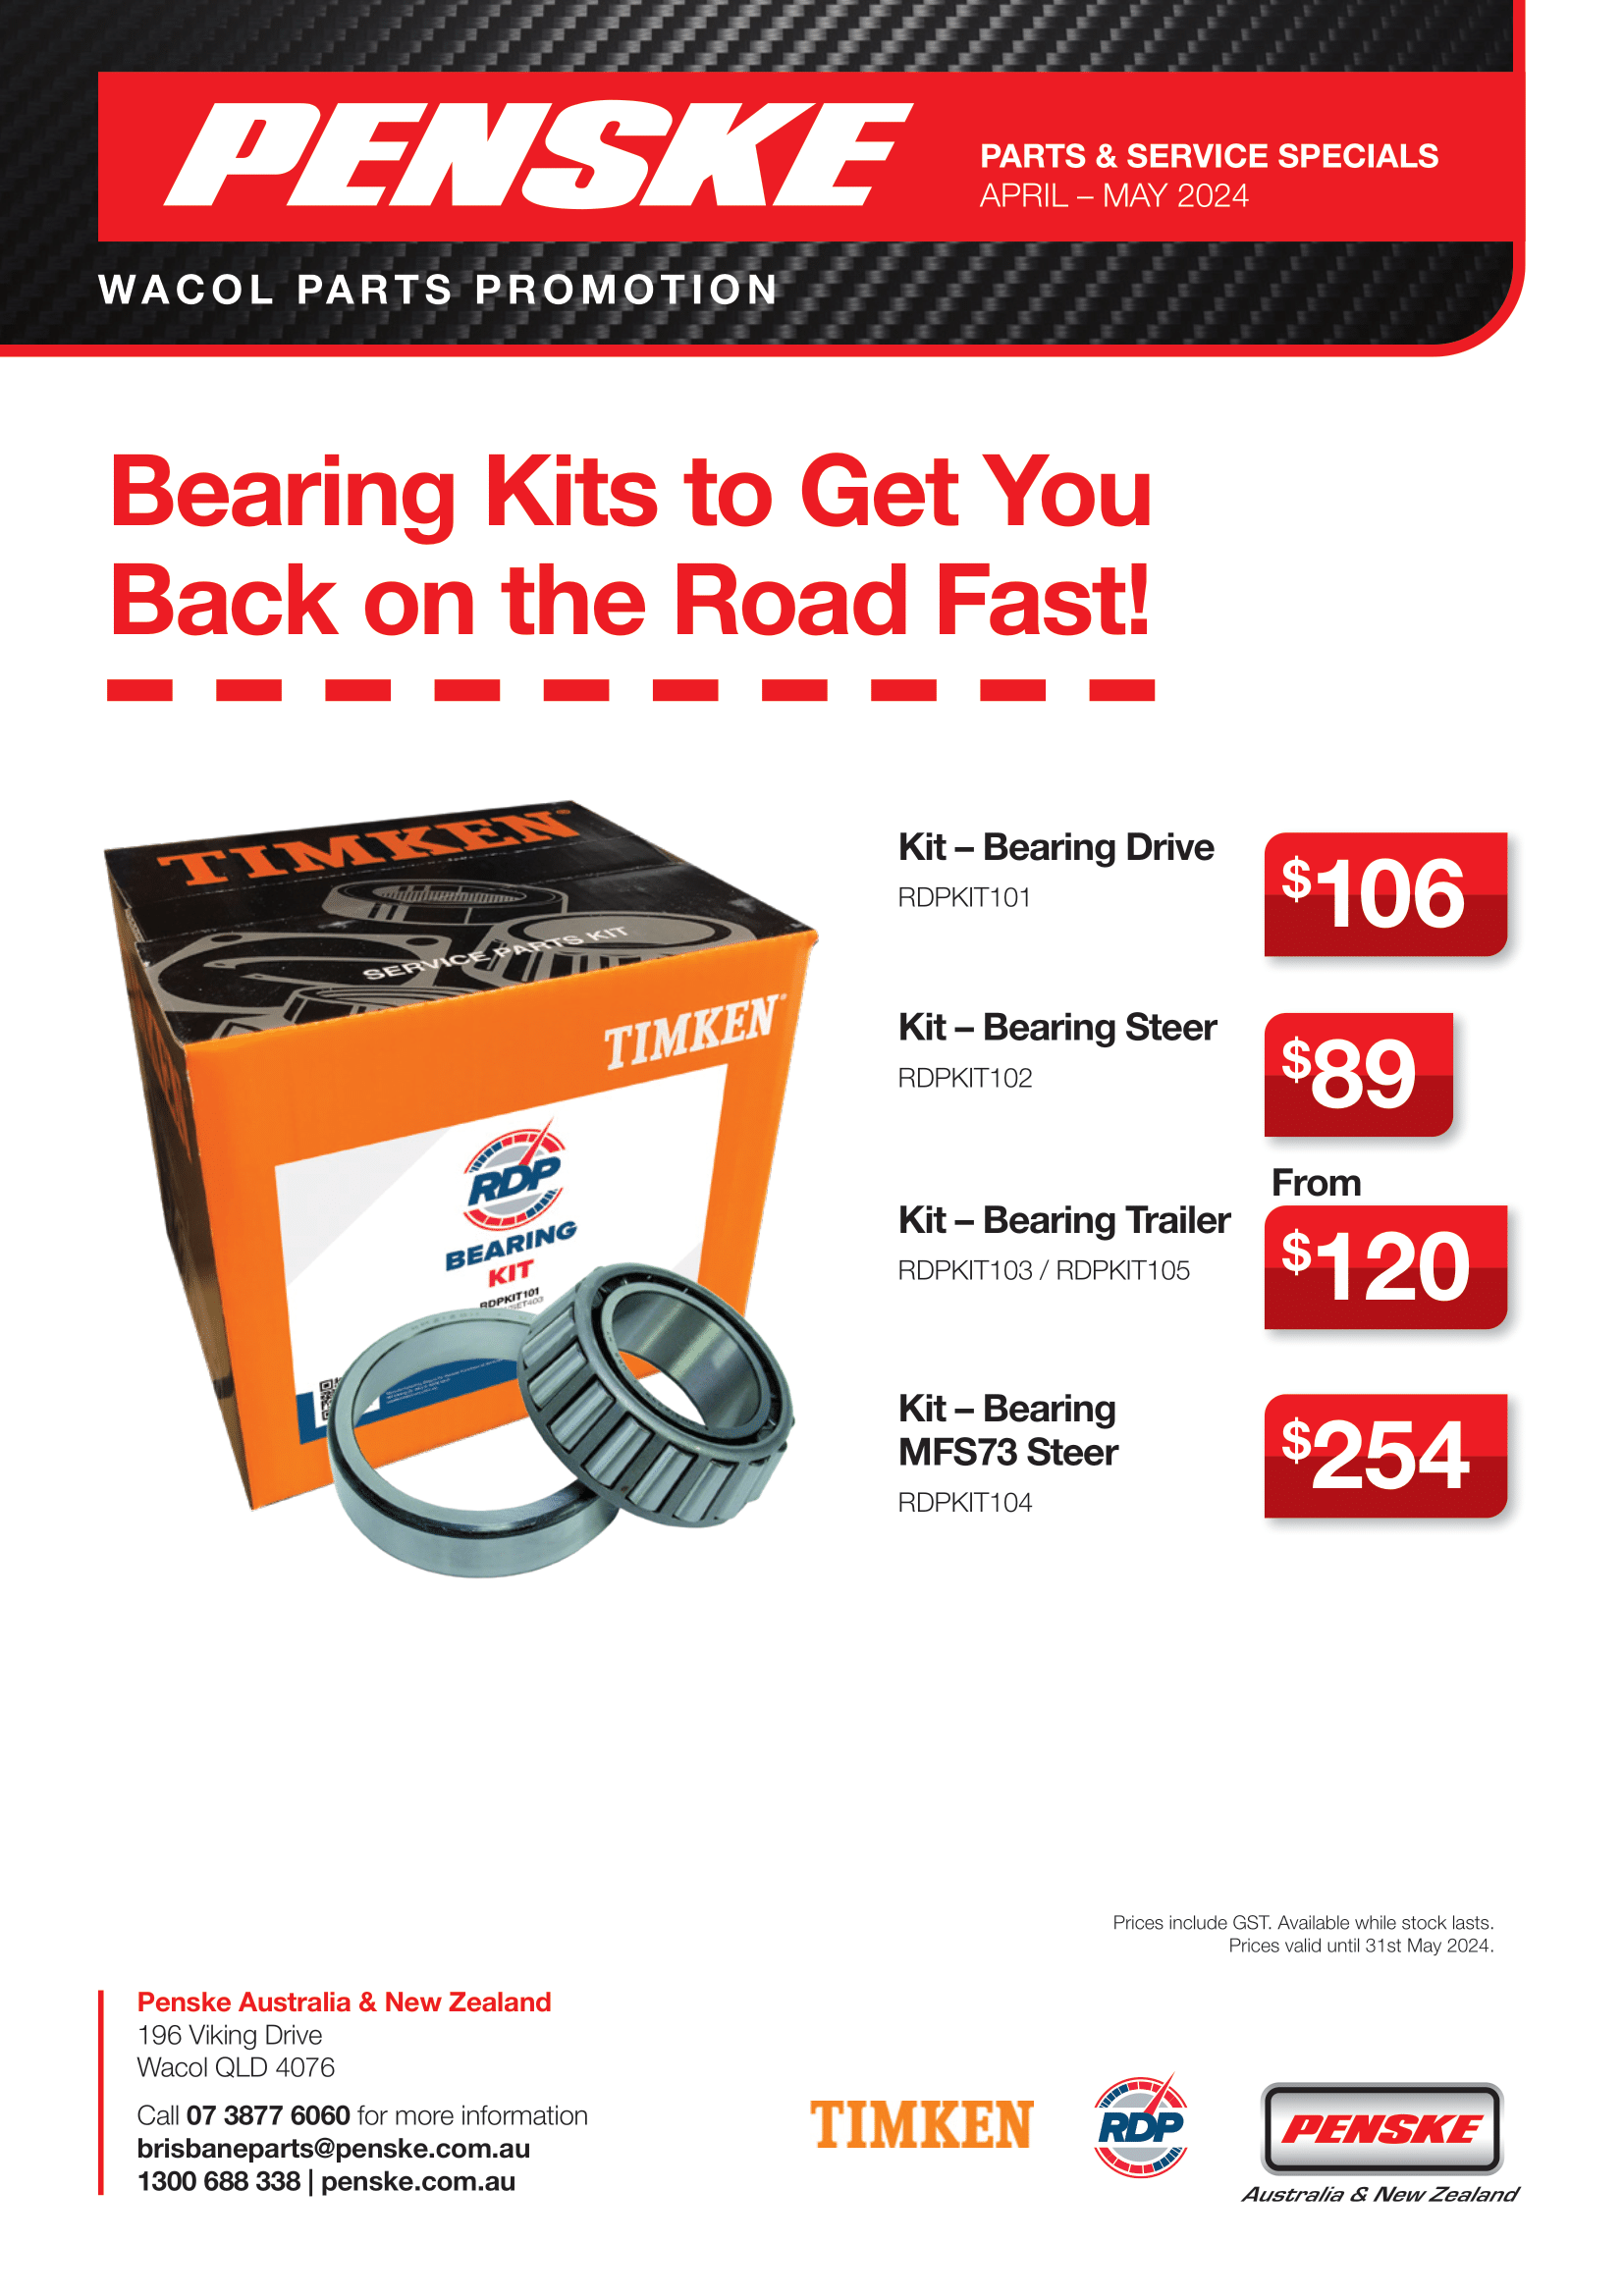 Bearing Parts Promotion